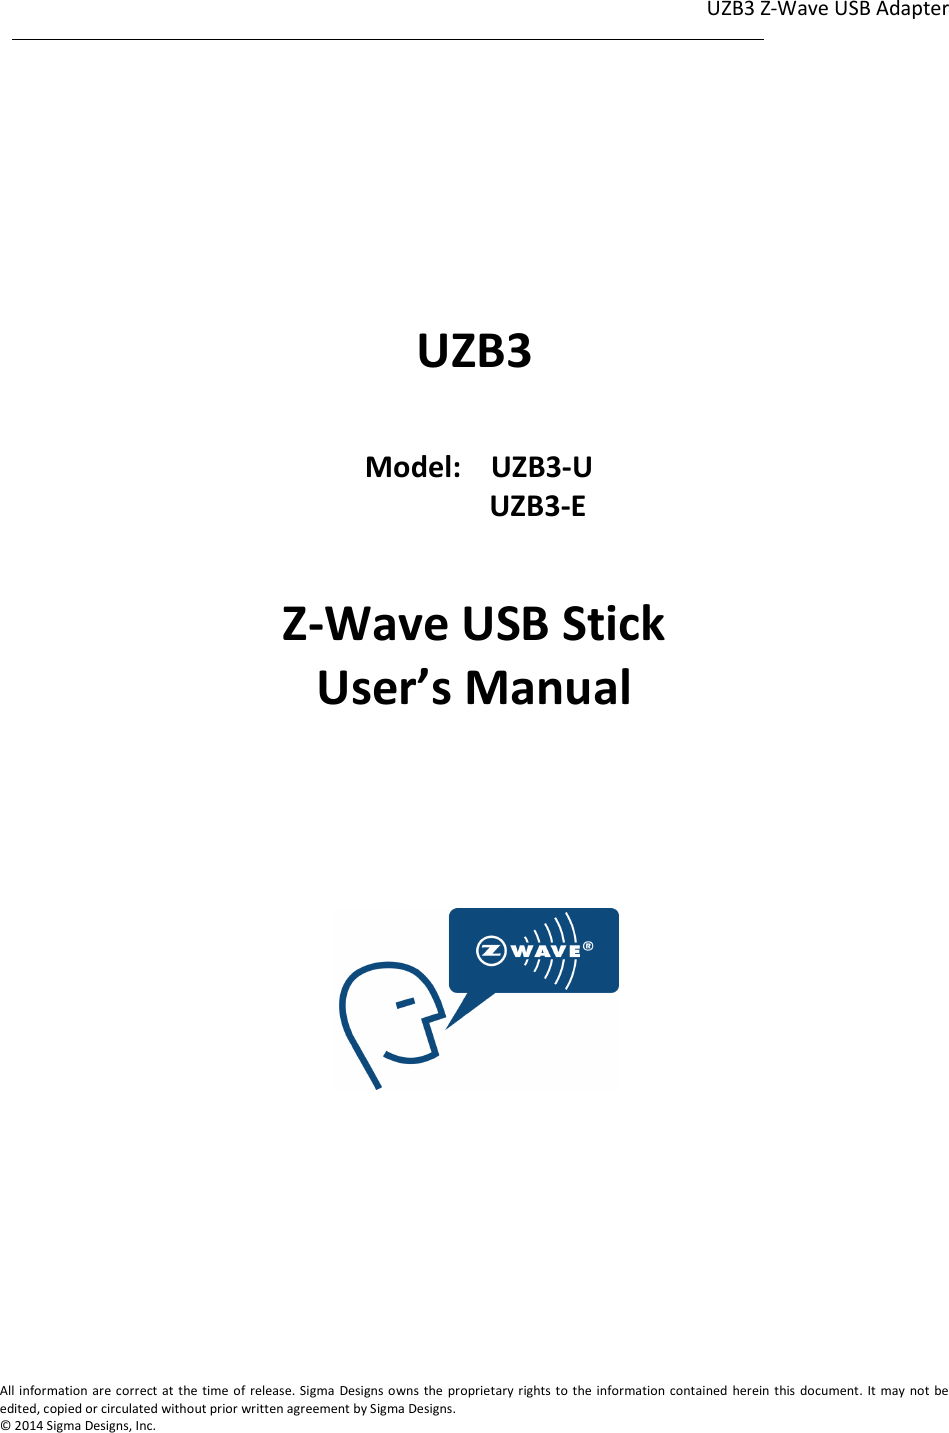 UZB3 Z-Wave USB Adapter  1                                                                                                                                                                                                             1              All information are correct at the time of release. Sigma  Designs owns  the proprietary rights to the information contained herein this document. It  may not  be edited, copied or circulated without prior written agreement by Sigma Designs.   © 2014 Sigma Designs, Inc.       UZB3    Model:    UZB3-U                   UZB3-E  Z-Wave USB Stick User’s Manual        